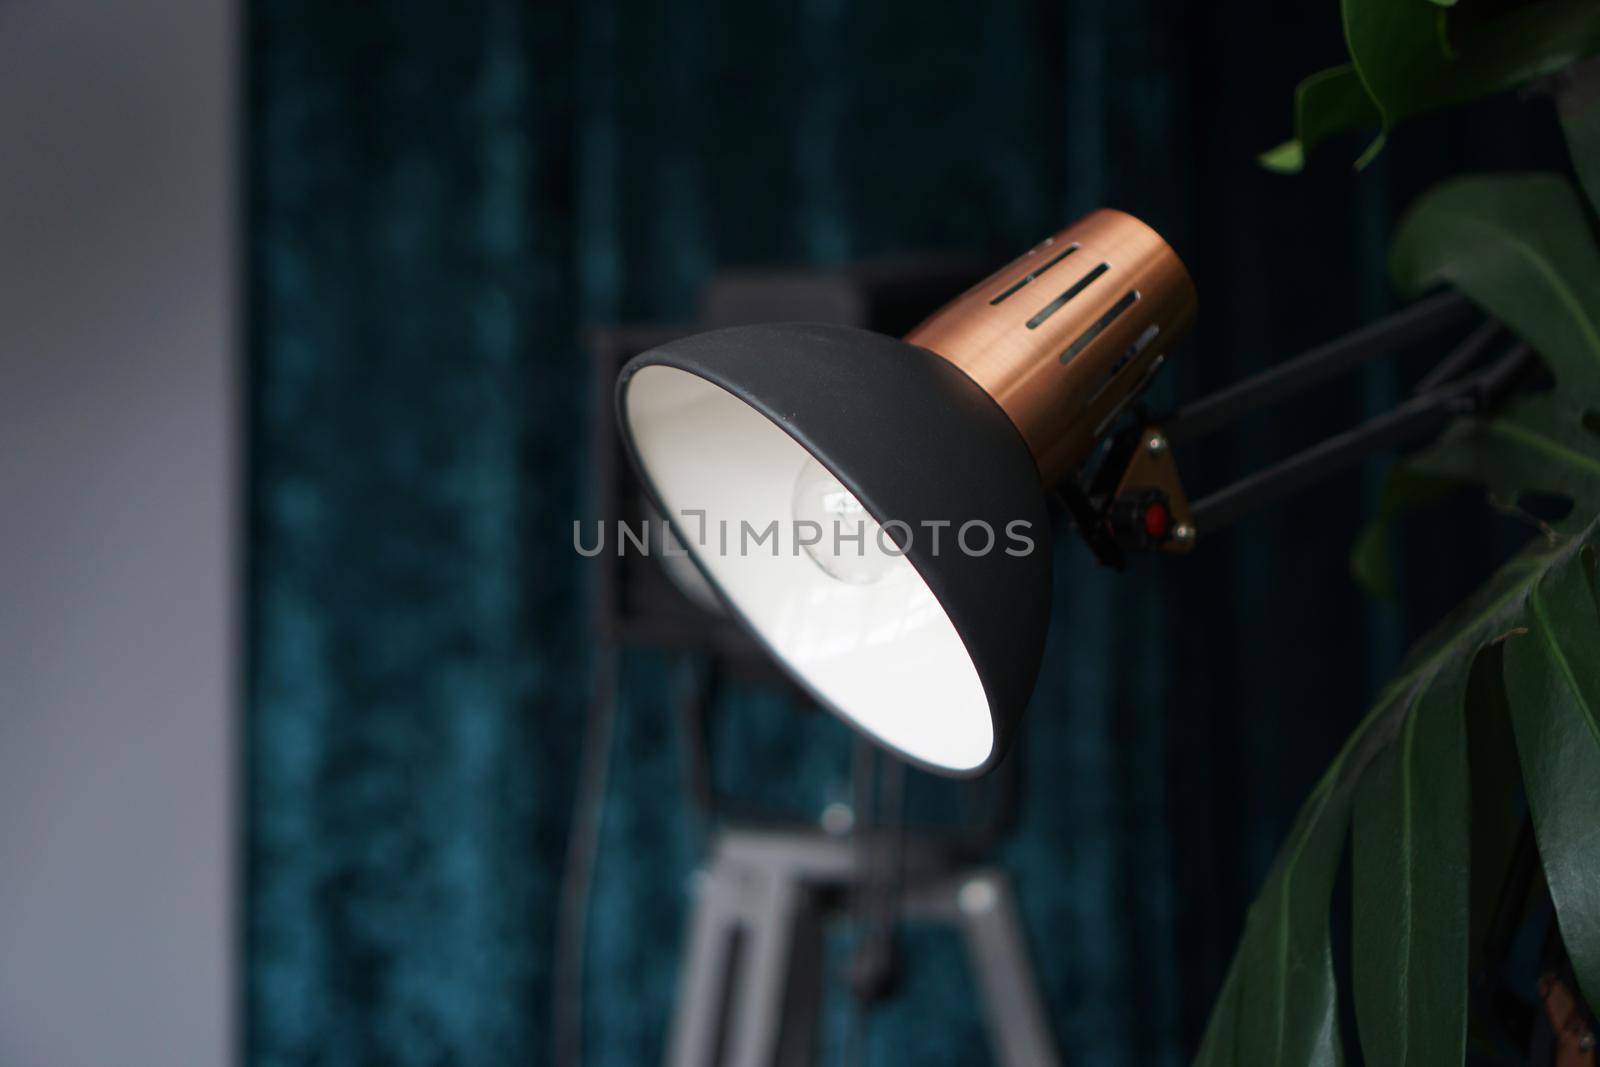 Photo studio lighting equipment on black and blue background by natali_brill